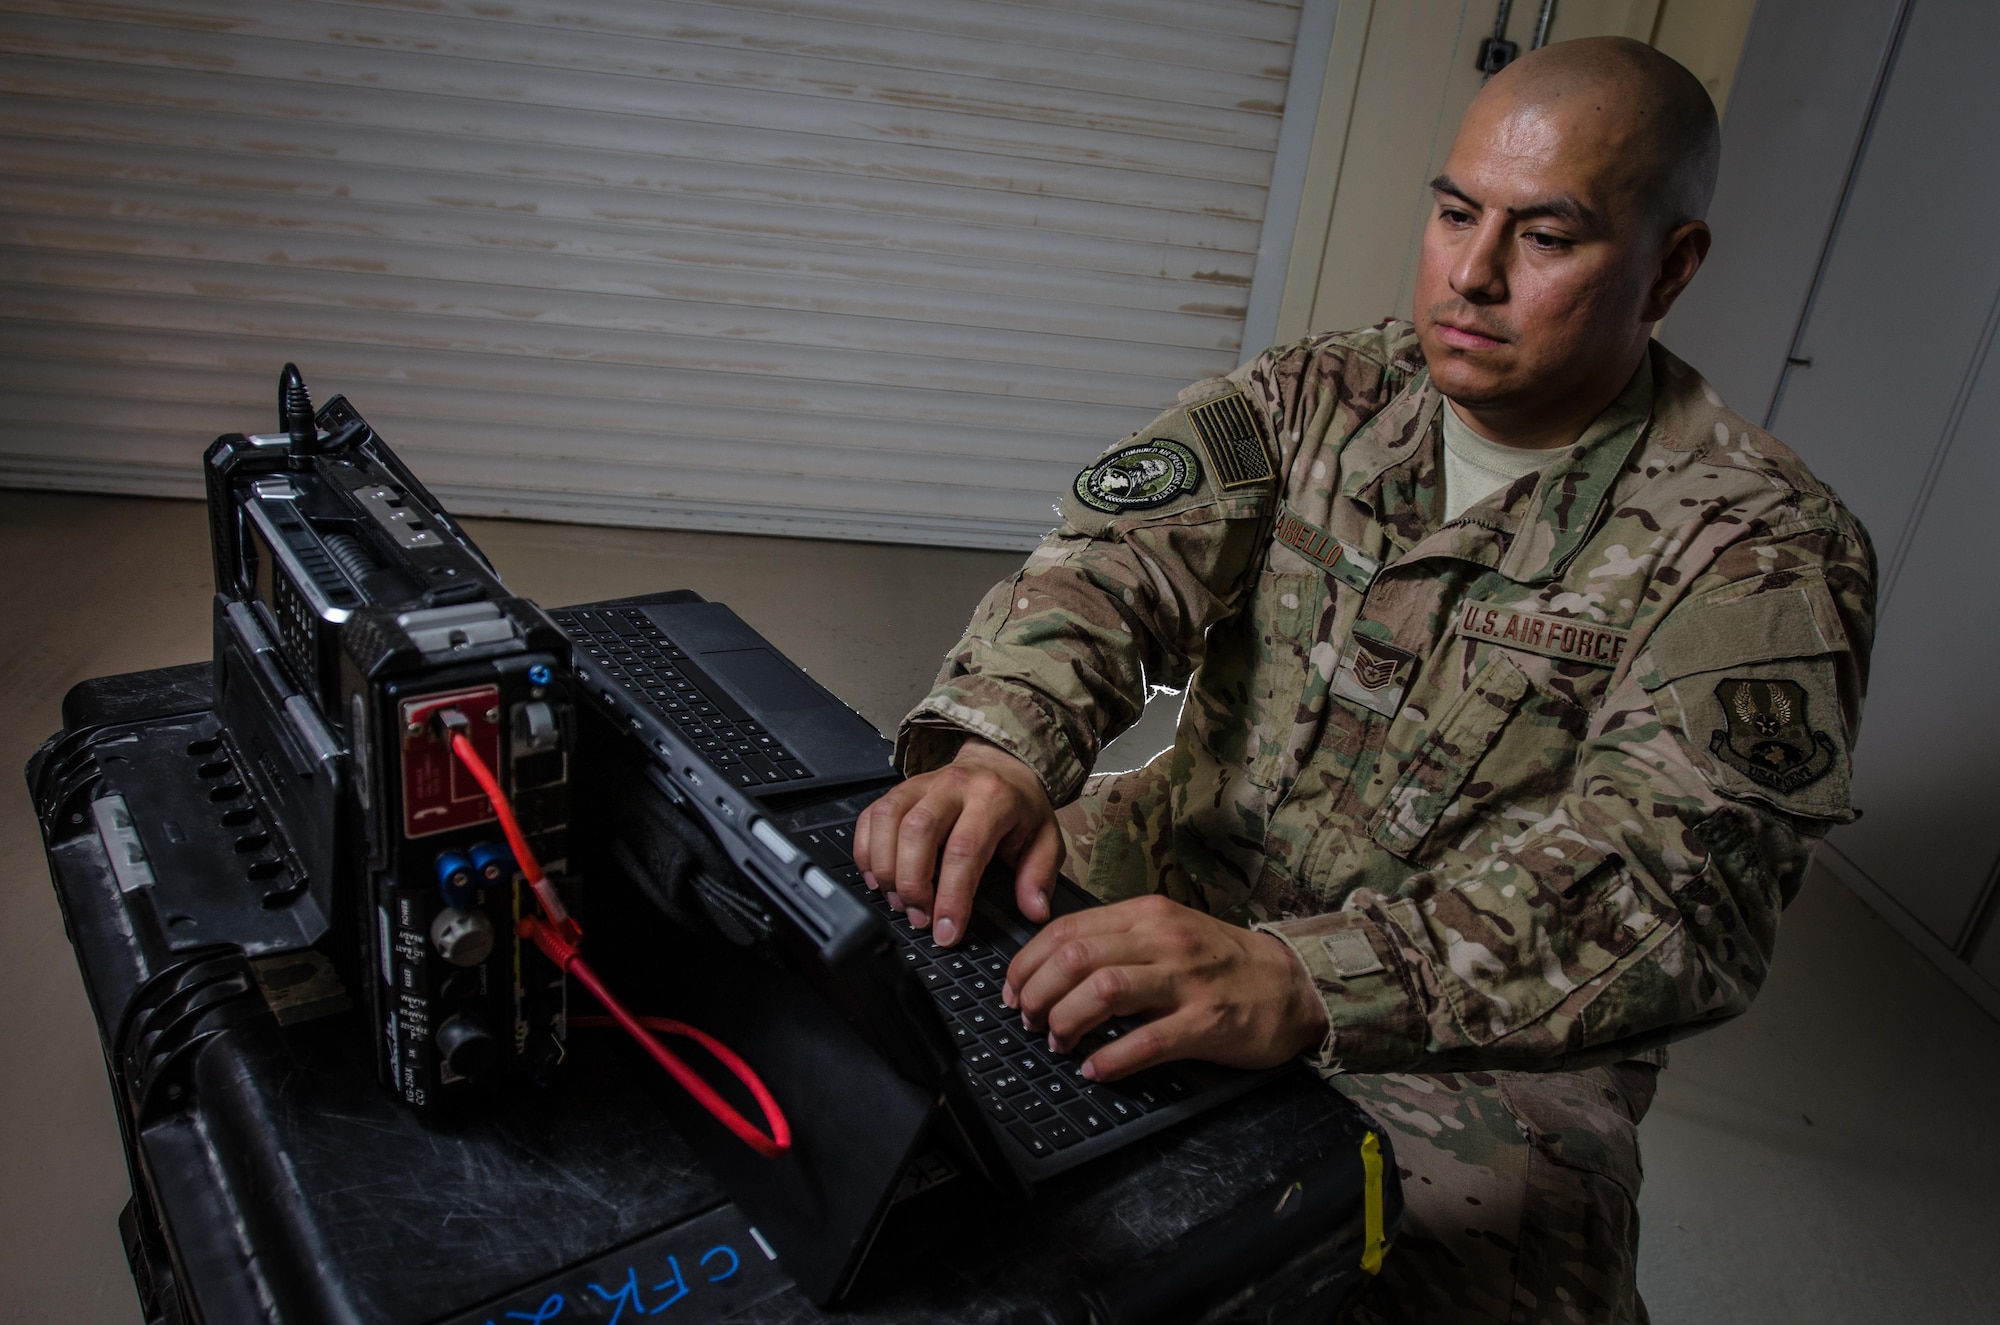 U.S. Air Force Tech. Sgt. Albert Cabello,the 609th Expeditionary Air and Space Communications Squadron NCO in charge of executive communications, tests Combined Air Operations Center, tests the new executive  kit Aug. 1, 2017, at Al Udeid Air Base, Qatar. Cabello provides secure command and control network communications for key Air Force leaders via commercial medians and establishes voice, video, e-mail, and data services using the new ECK. (U.S. Air Force photo by Staff Sgt. Alexander W. Riedel)